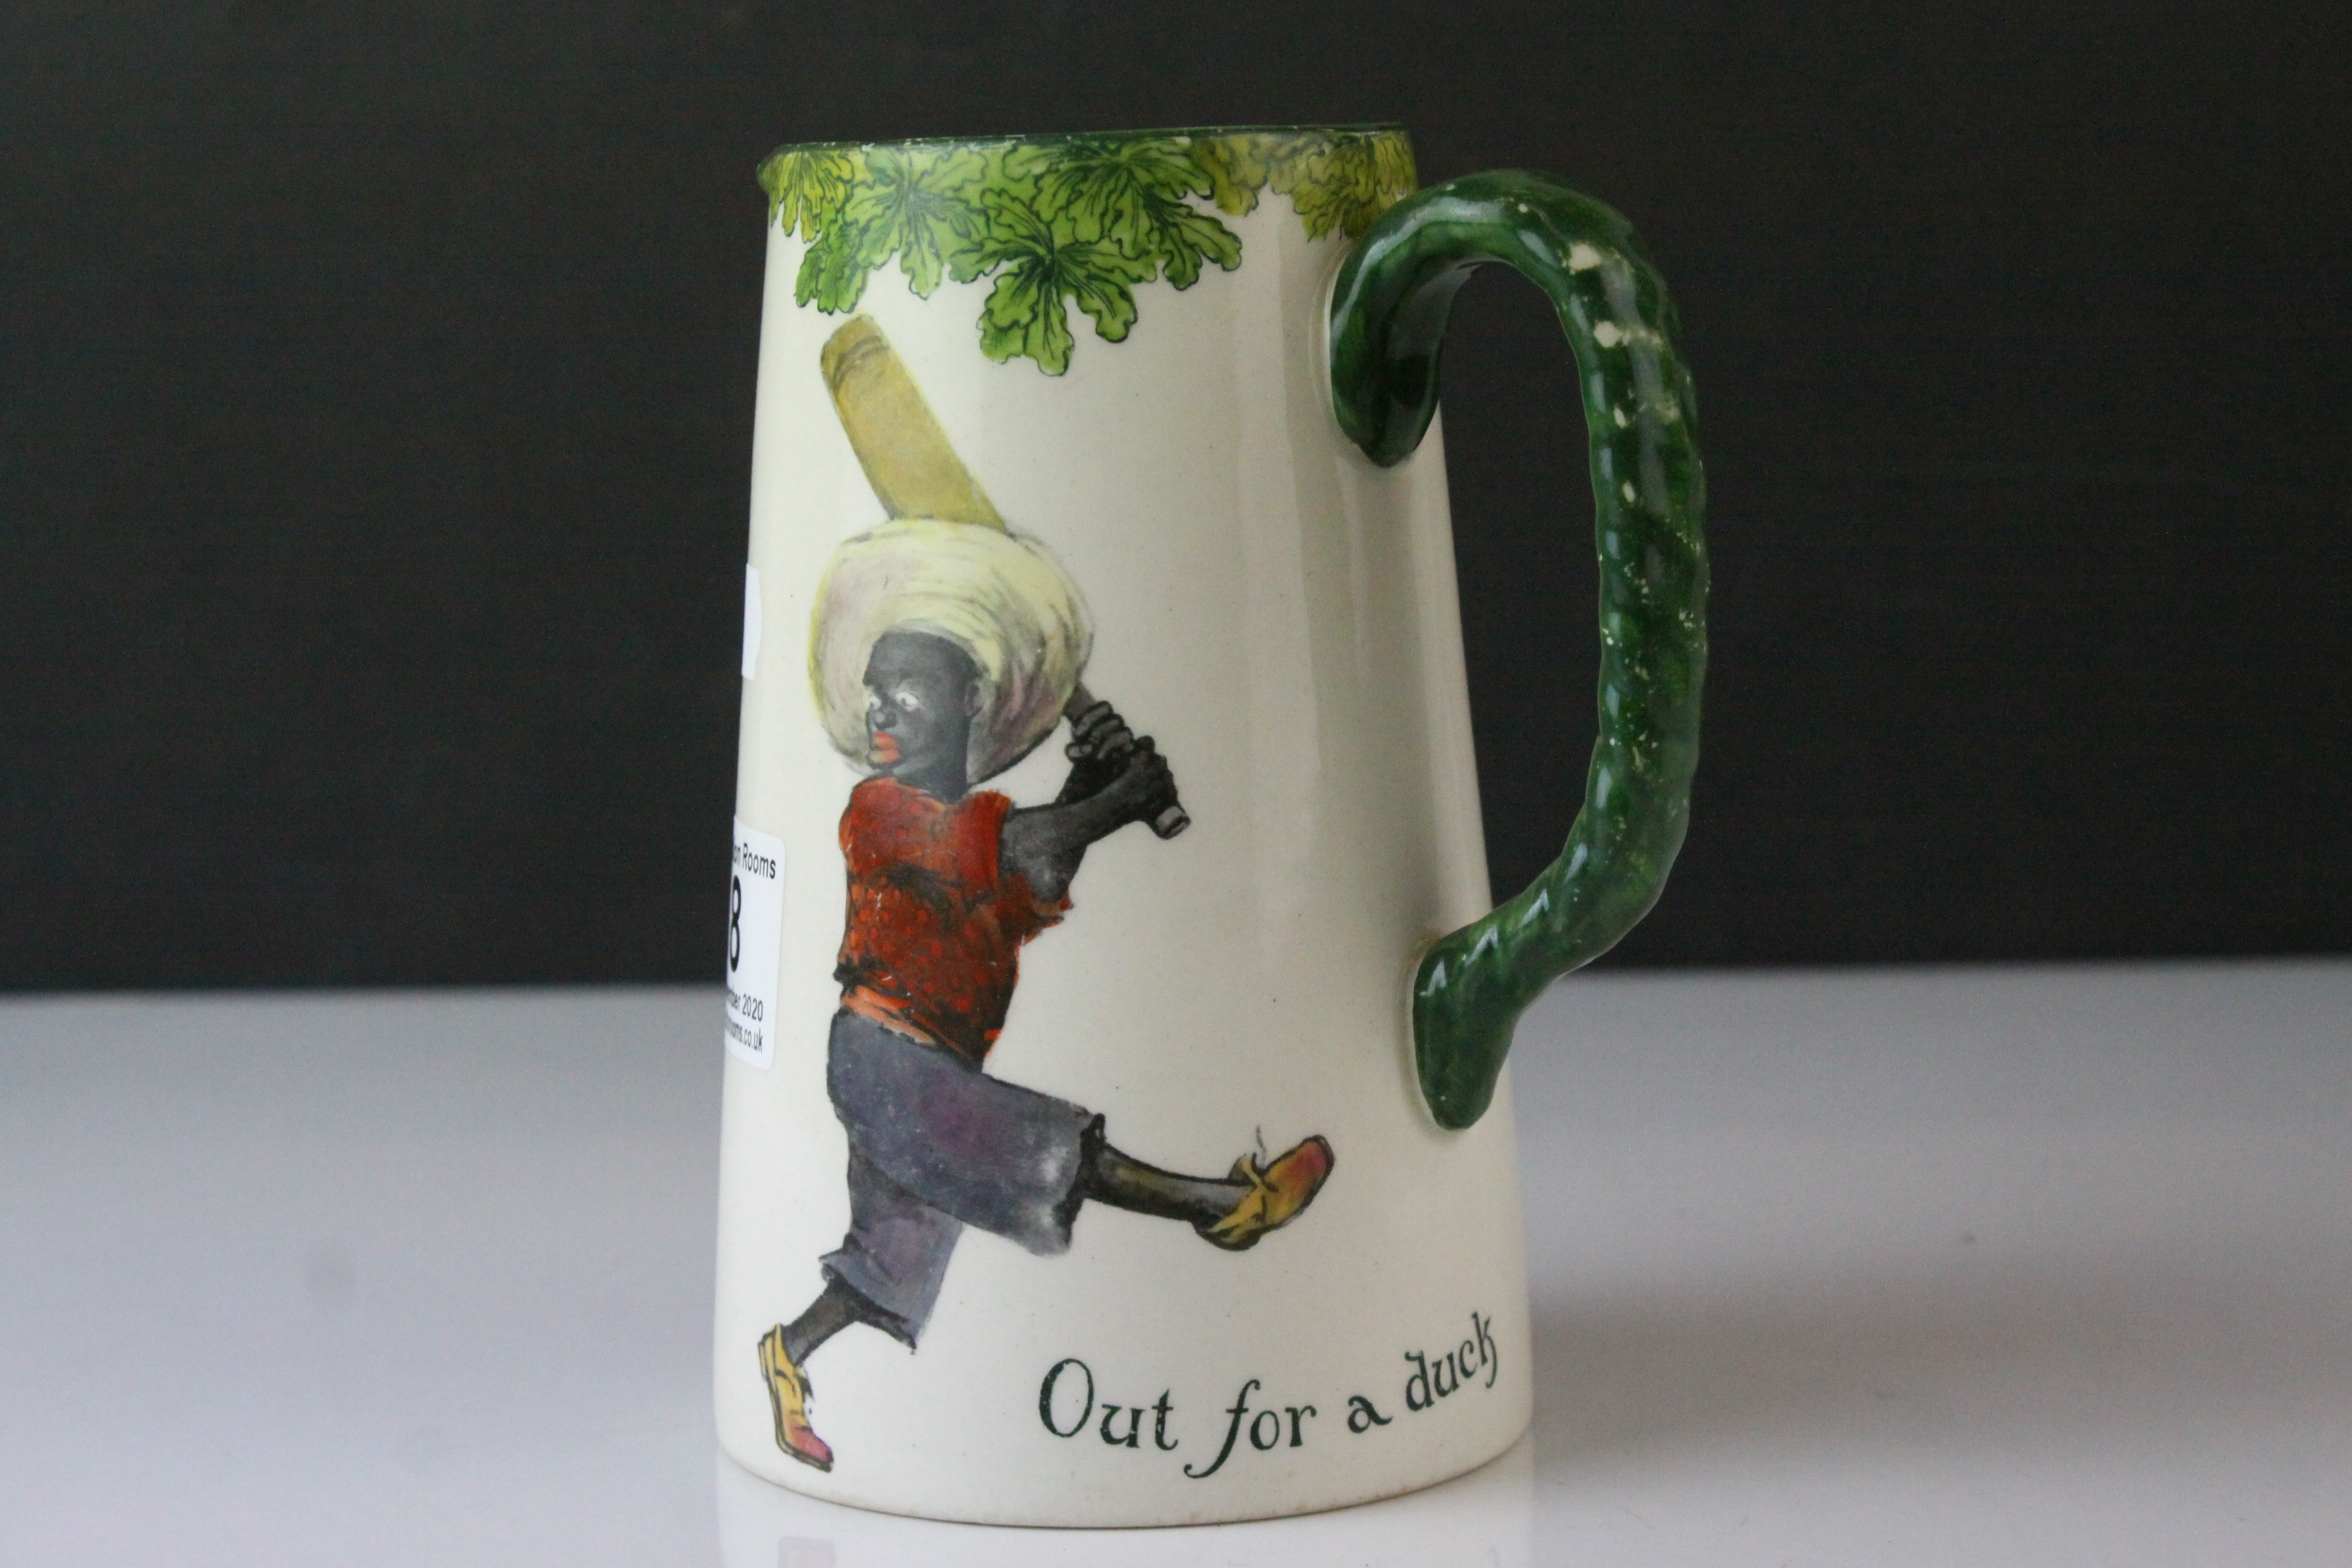 Royal Doulton Black Cricketers Seriesware Jug titled ' Out for a duck ' 14.5cms high - Image 2 of 11